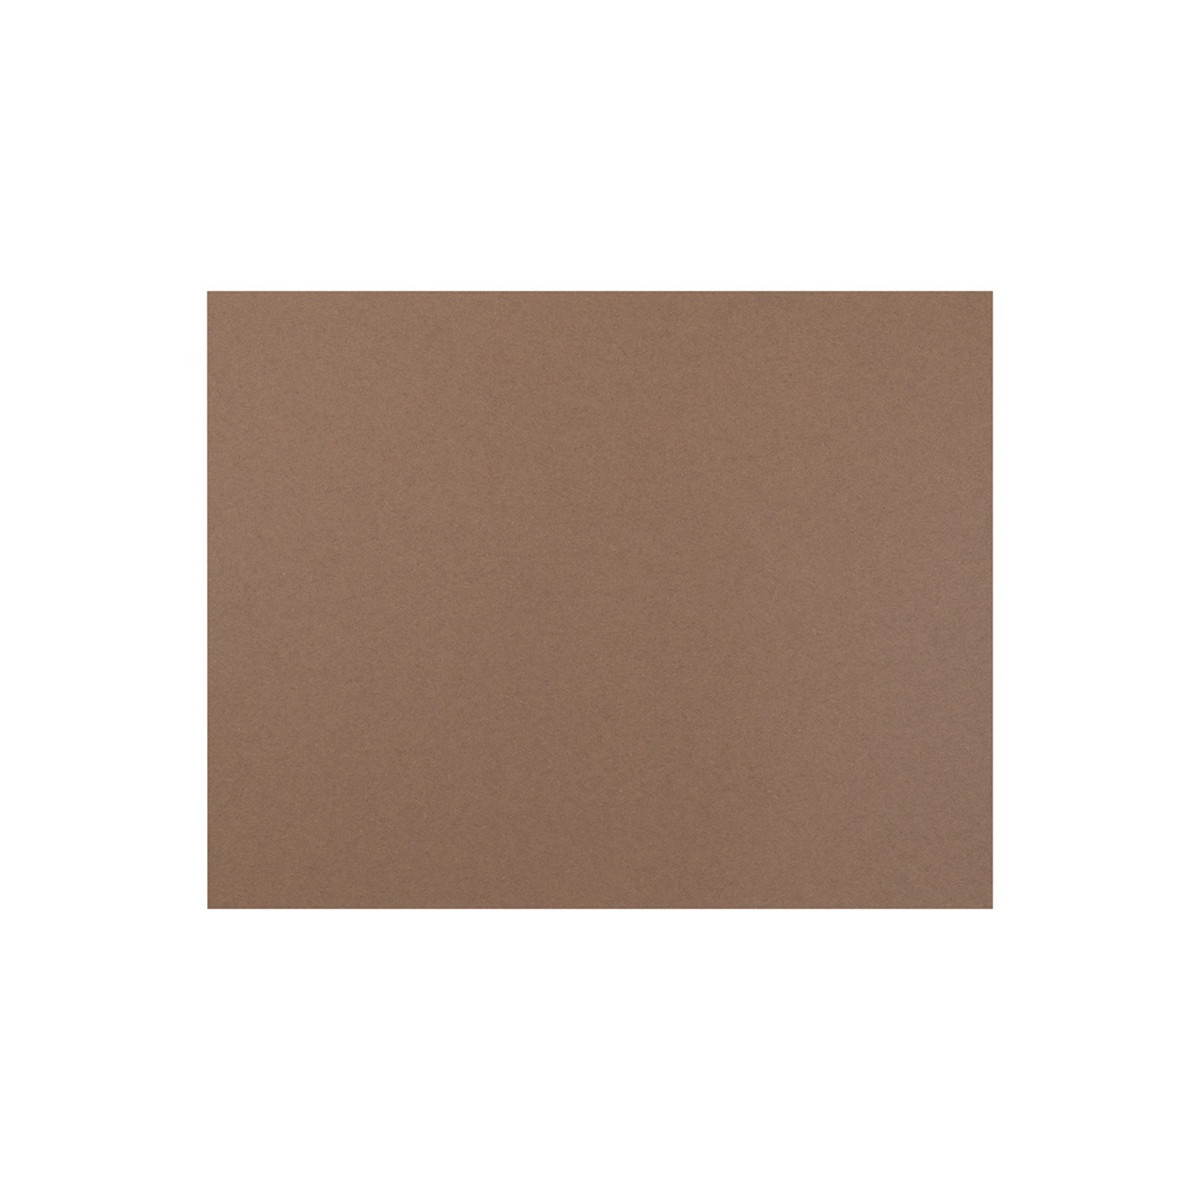 Post-it Super Sticky Self Stick Table Top Pad 20 X 23 20 Sheets